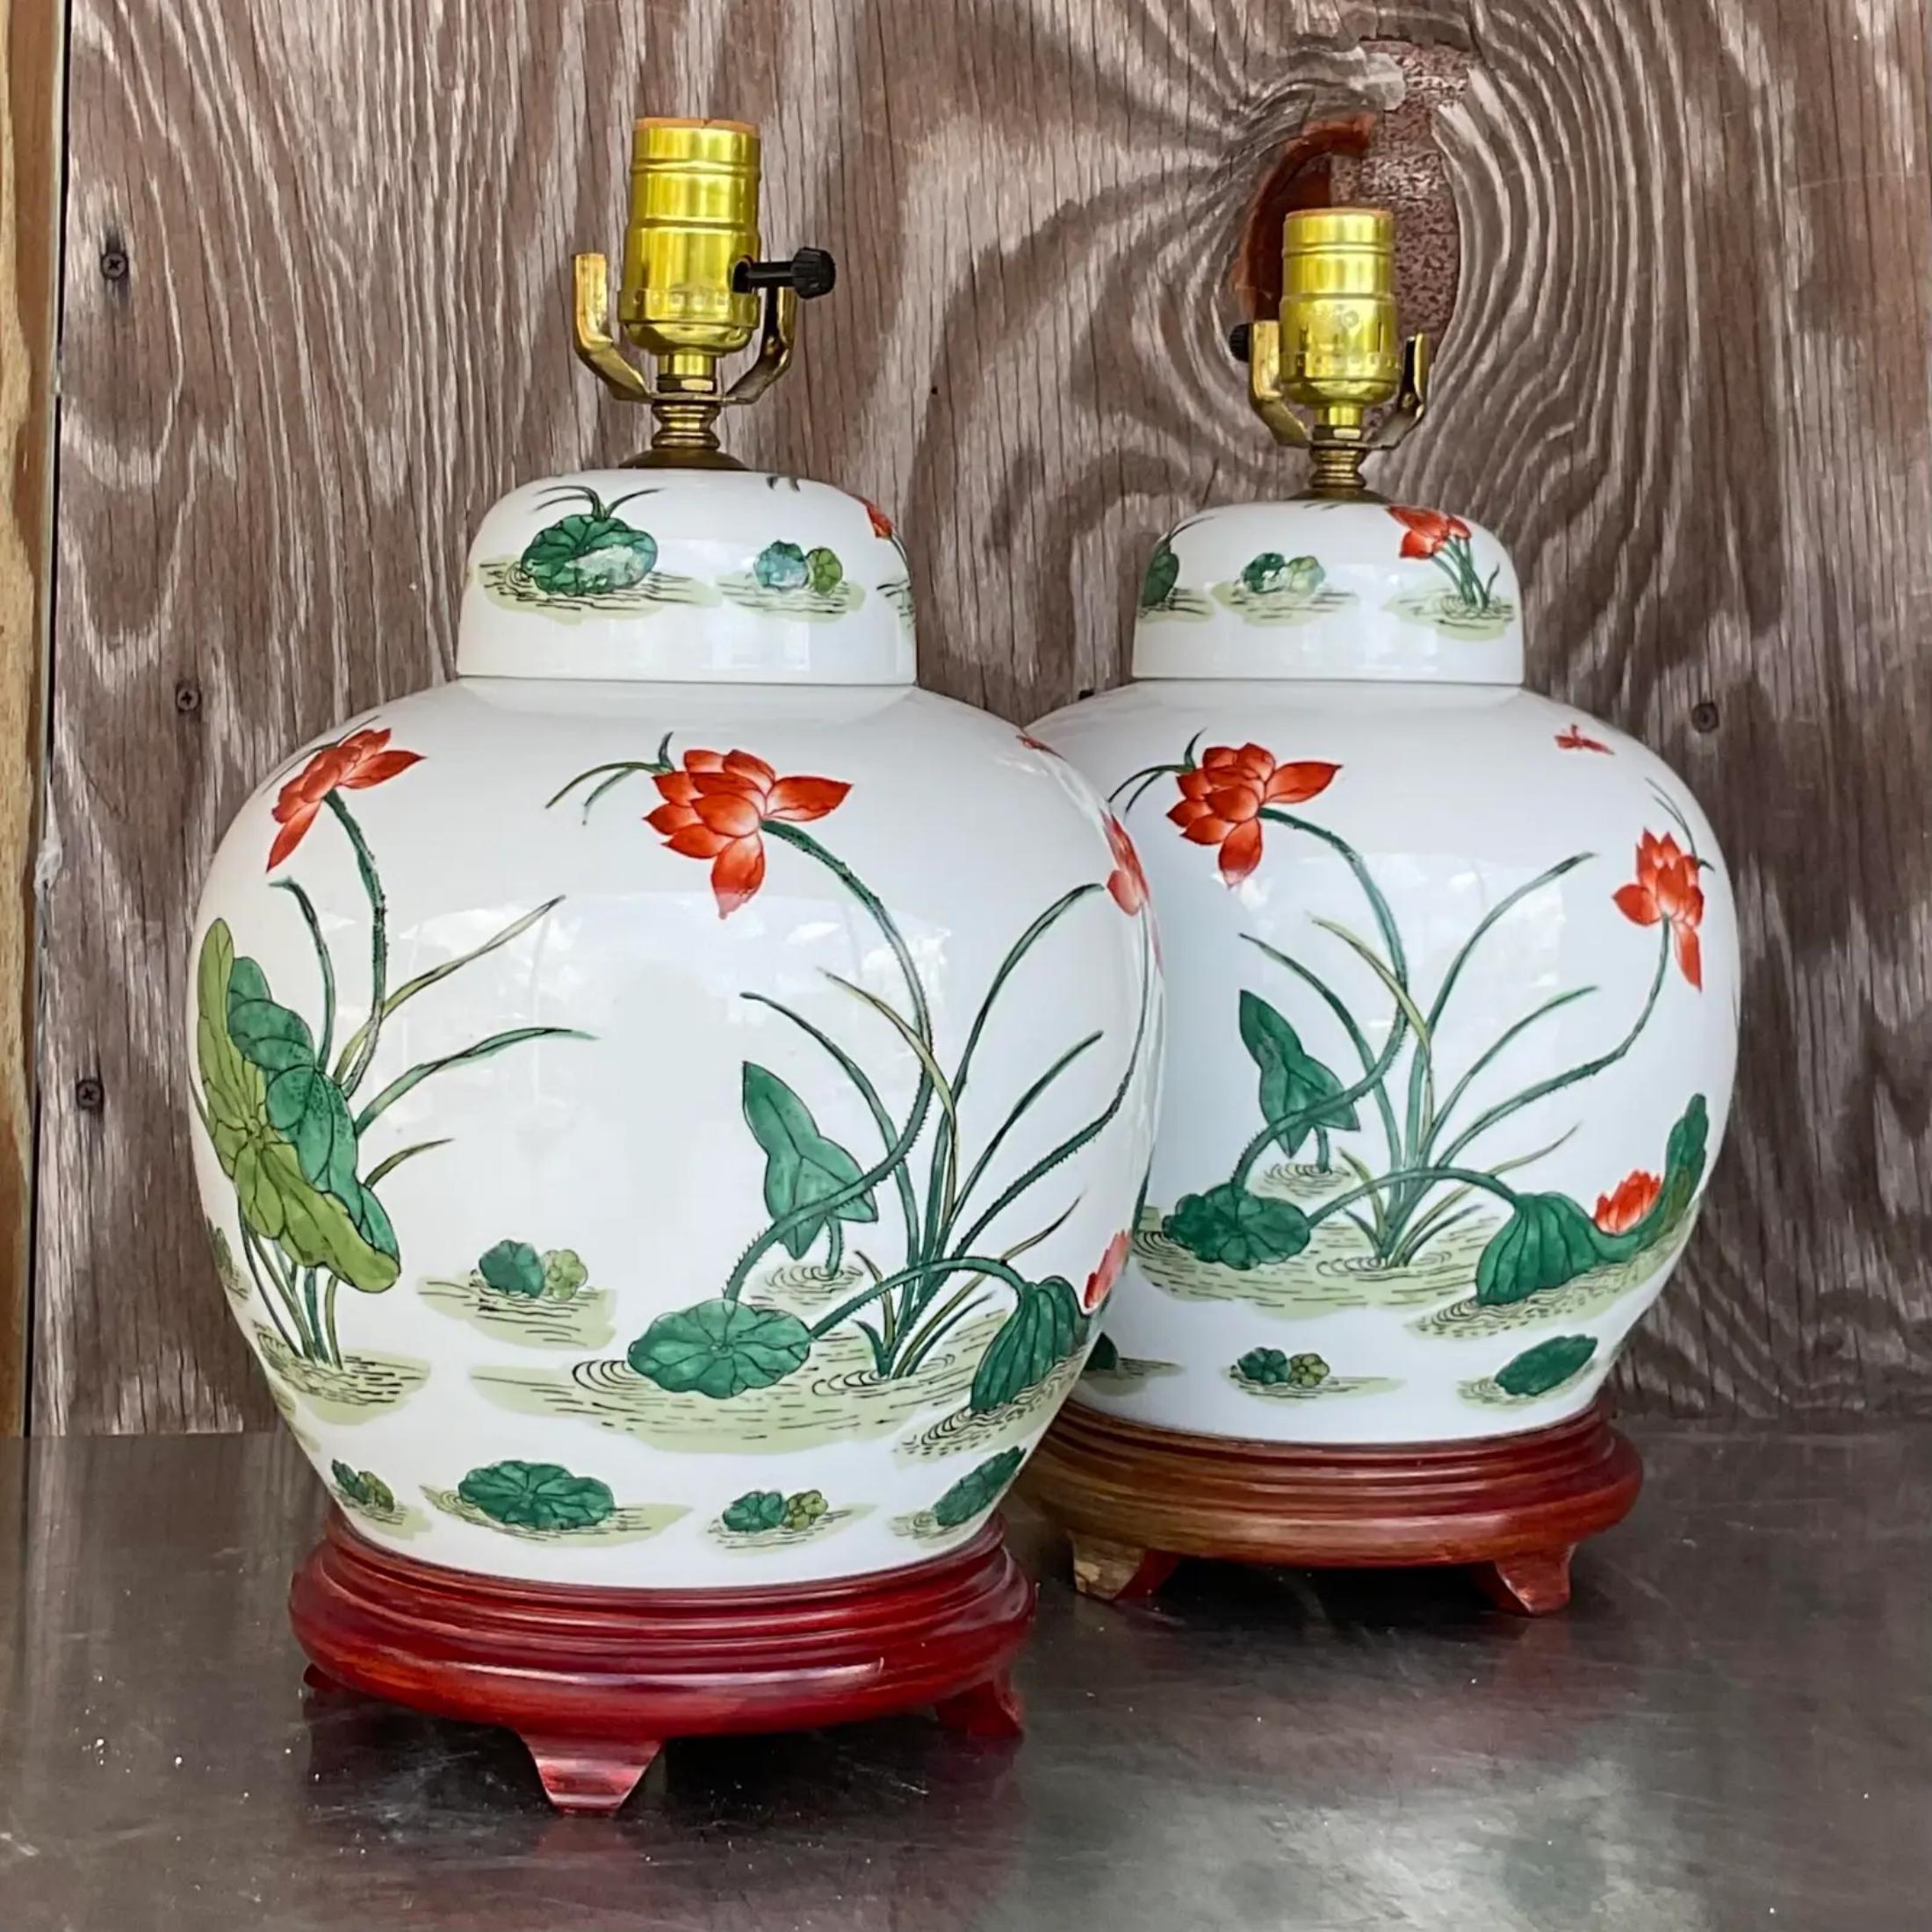 A fabulous pair of vintage Asian Floral lamps. A chic ginger jar shape with a glazed ceramic finish. Rest of wooden plinths. Acquired from a Palm Beach estate.